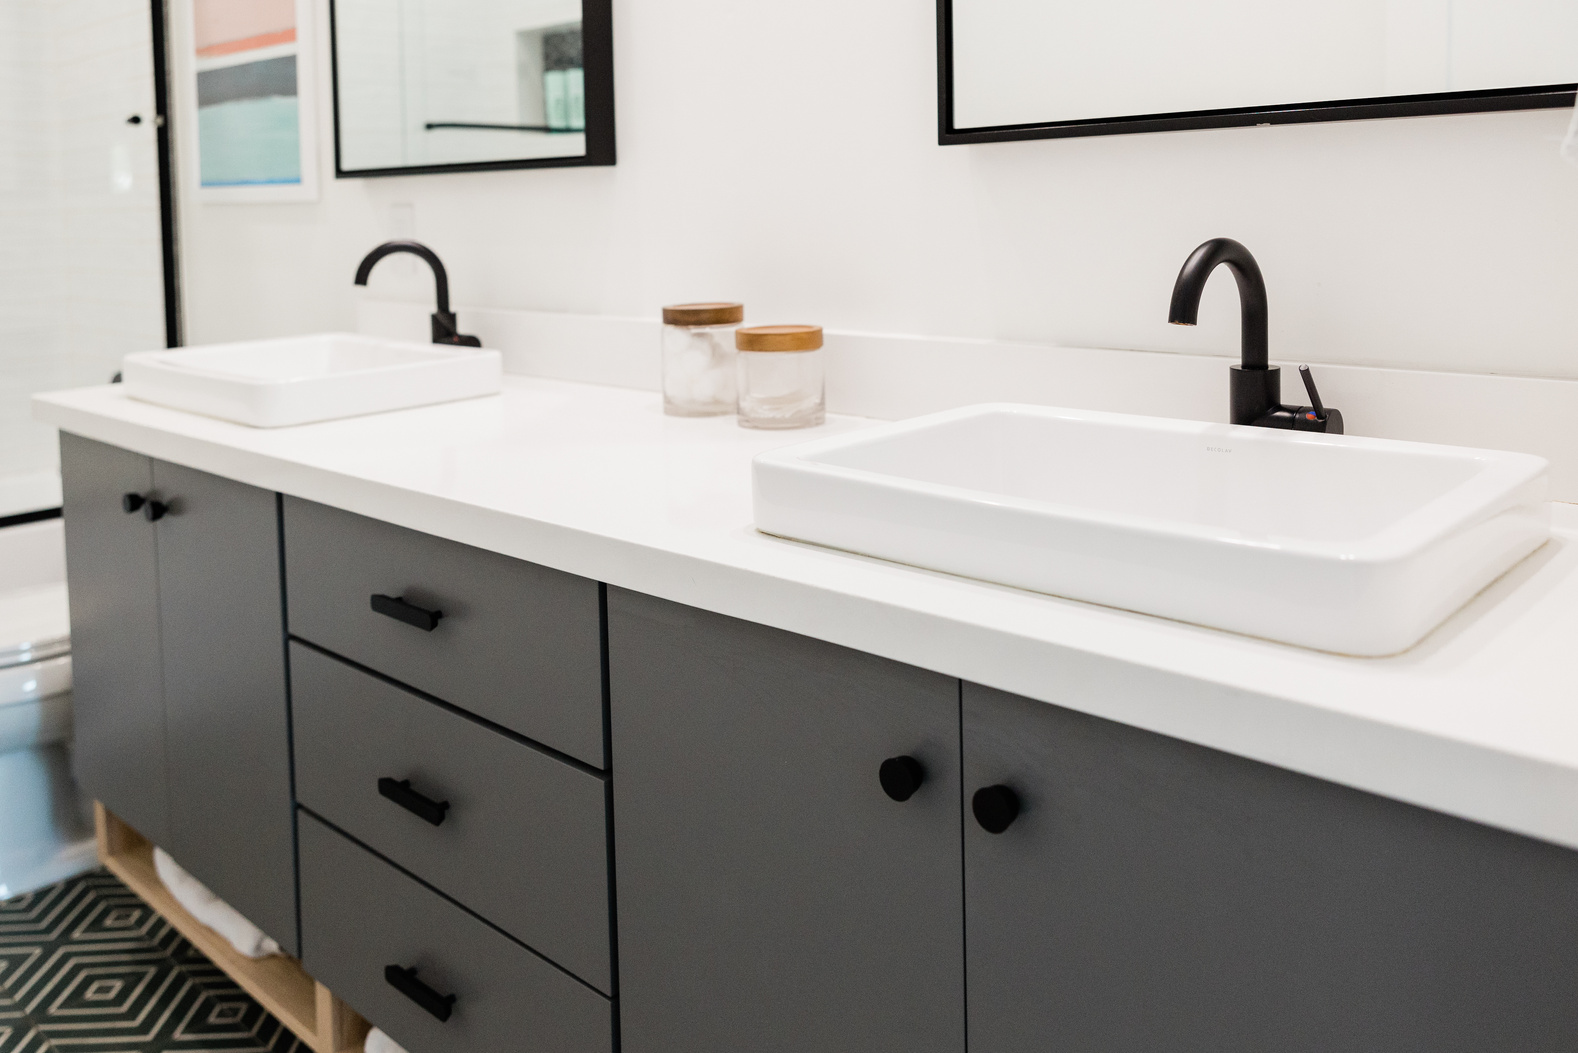 Sink with Cabinet in the Bathroom